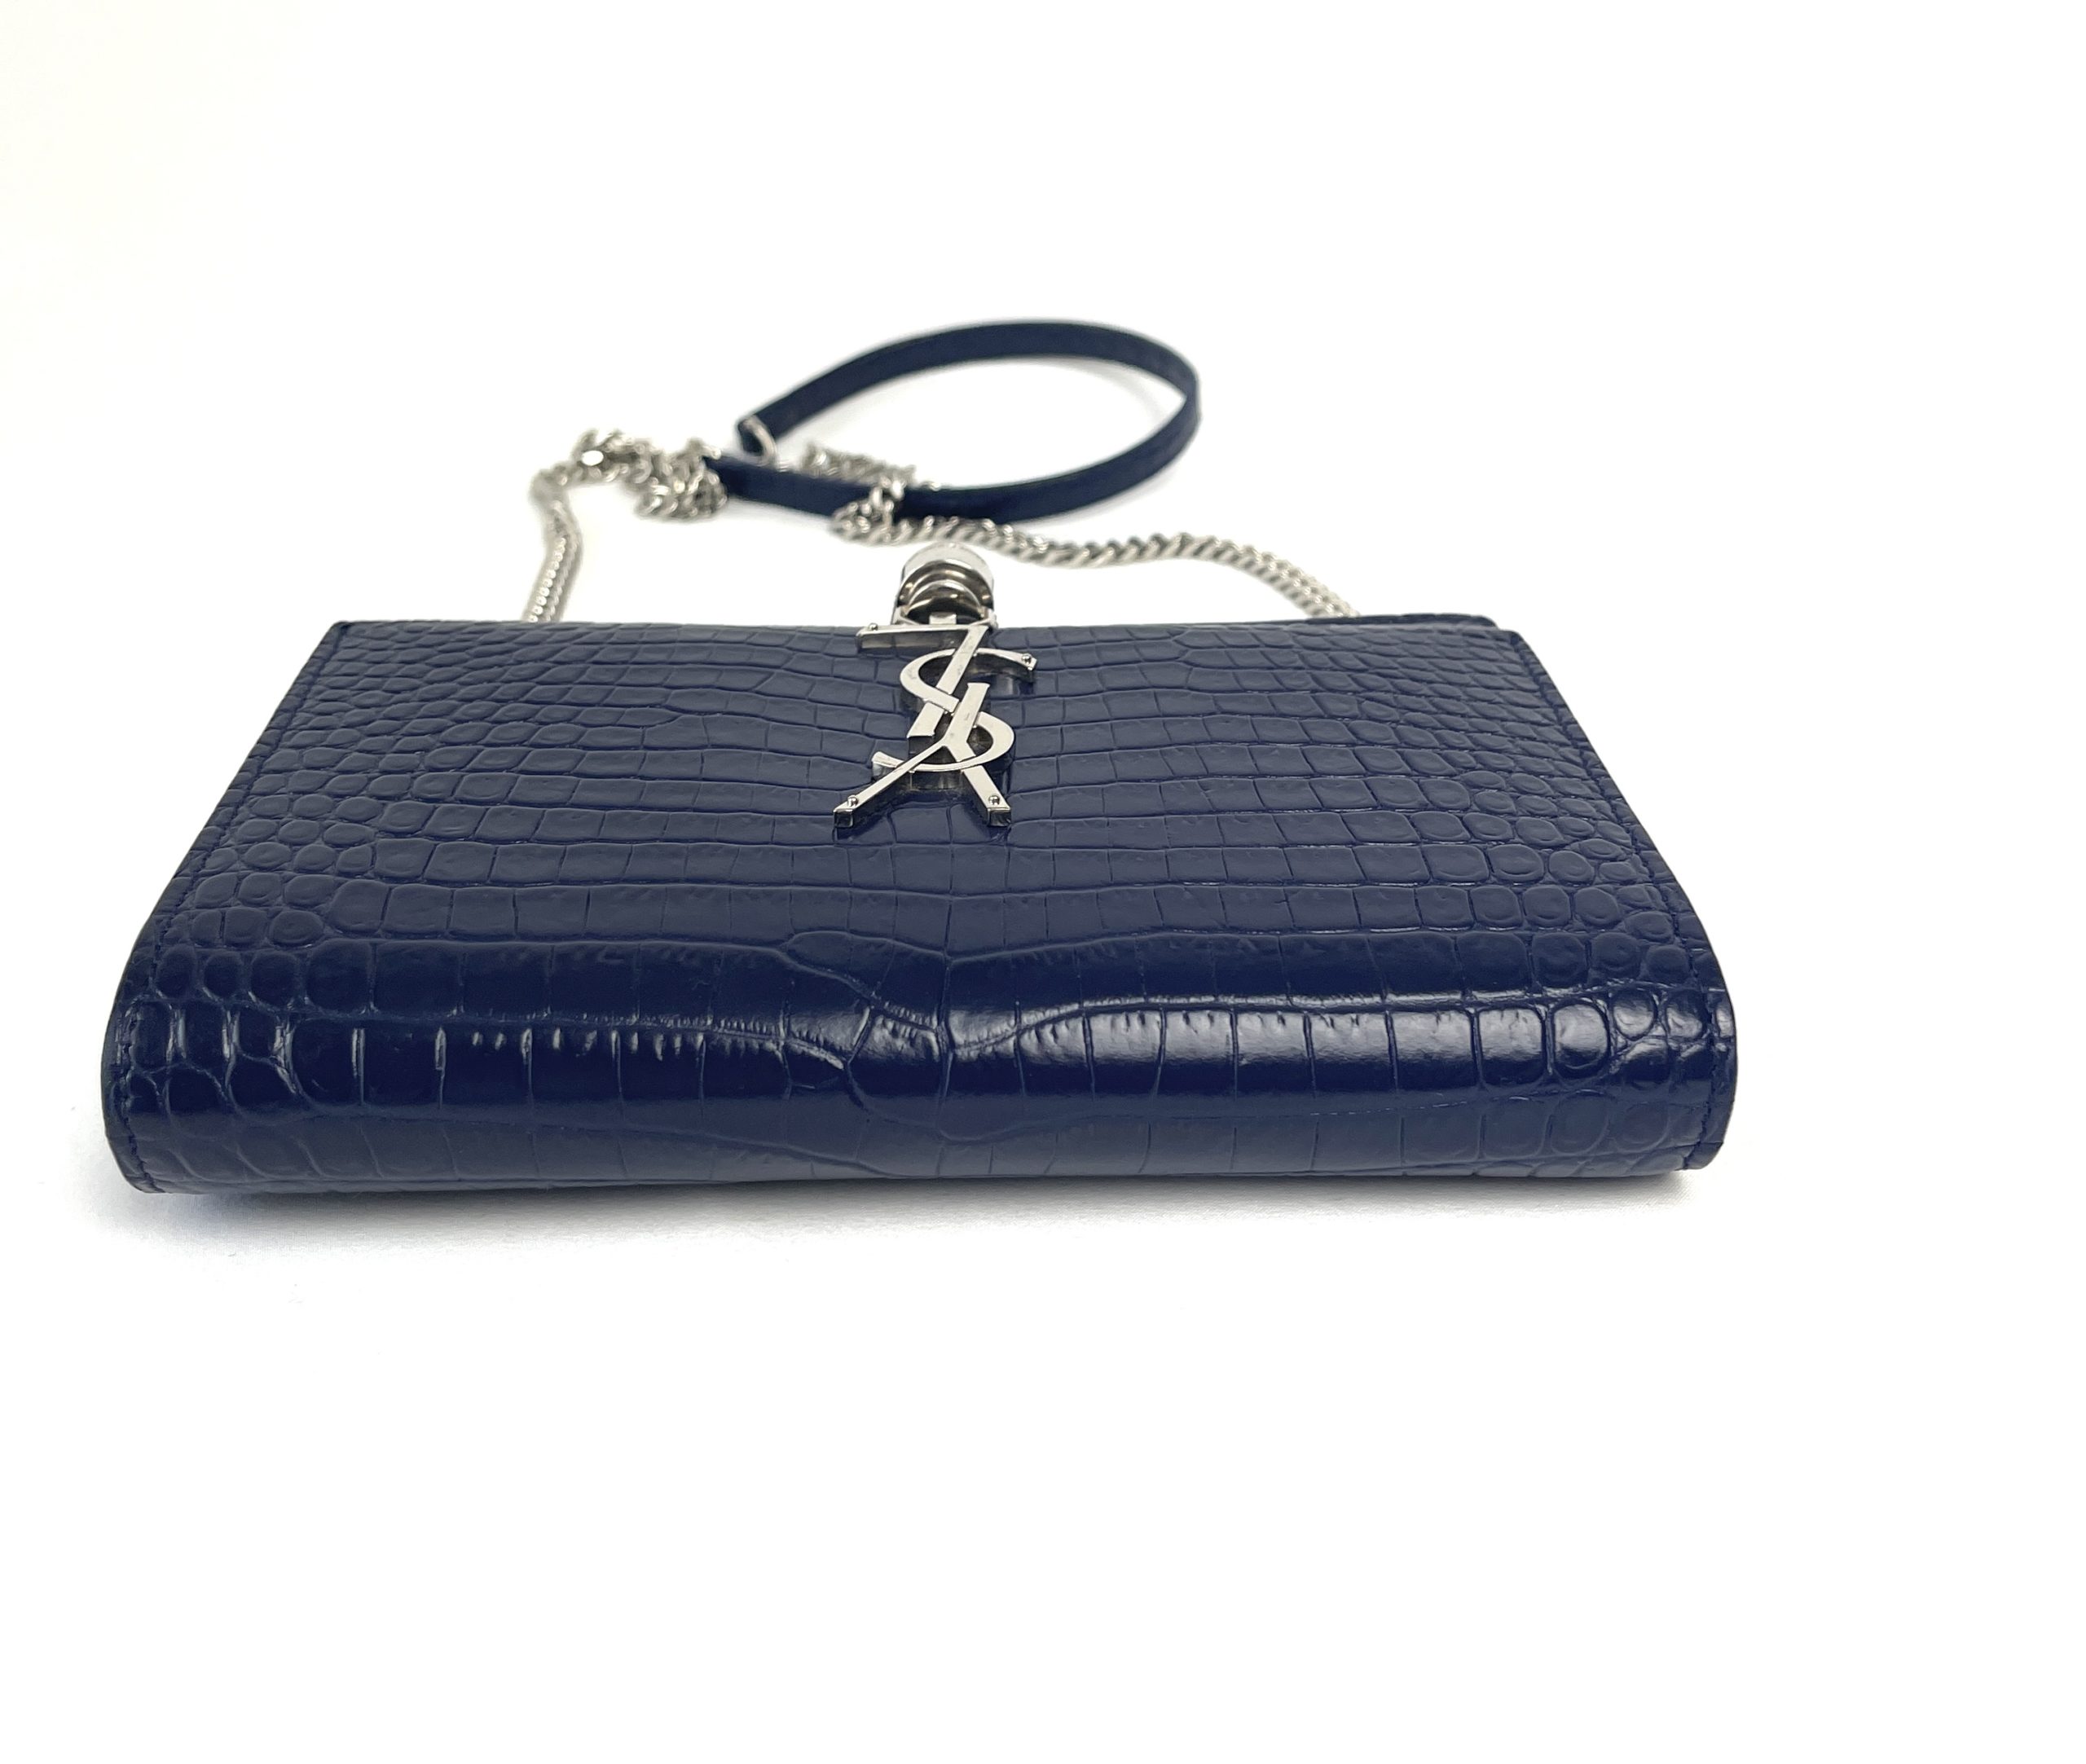 YSL Sunset Chain Wallet in Crocodile Embossed Leather w/ Crossbody